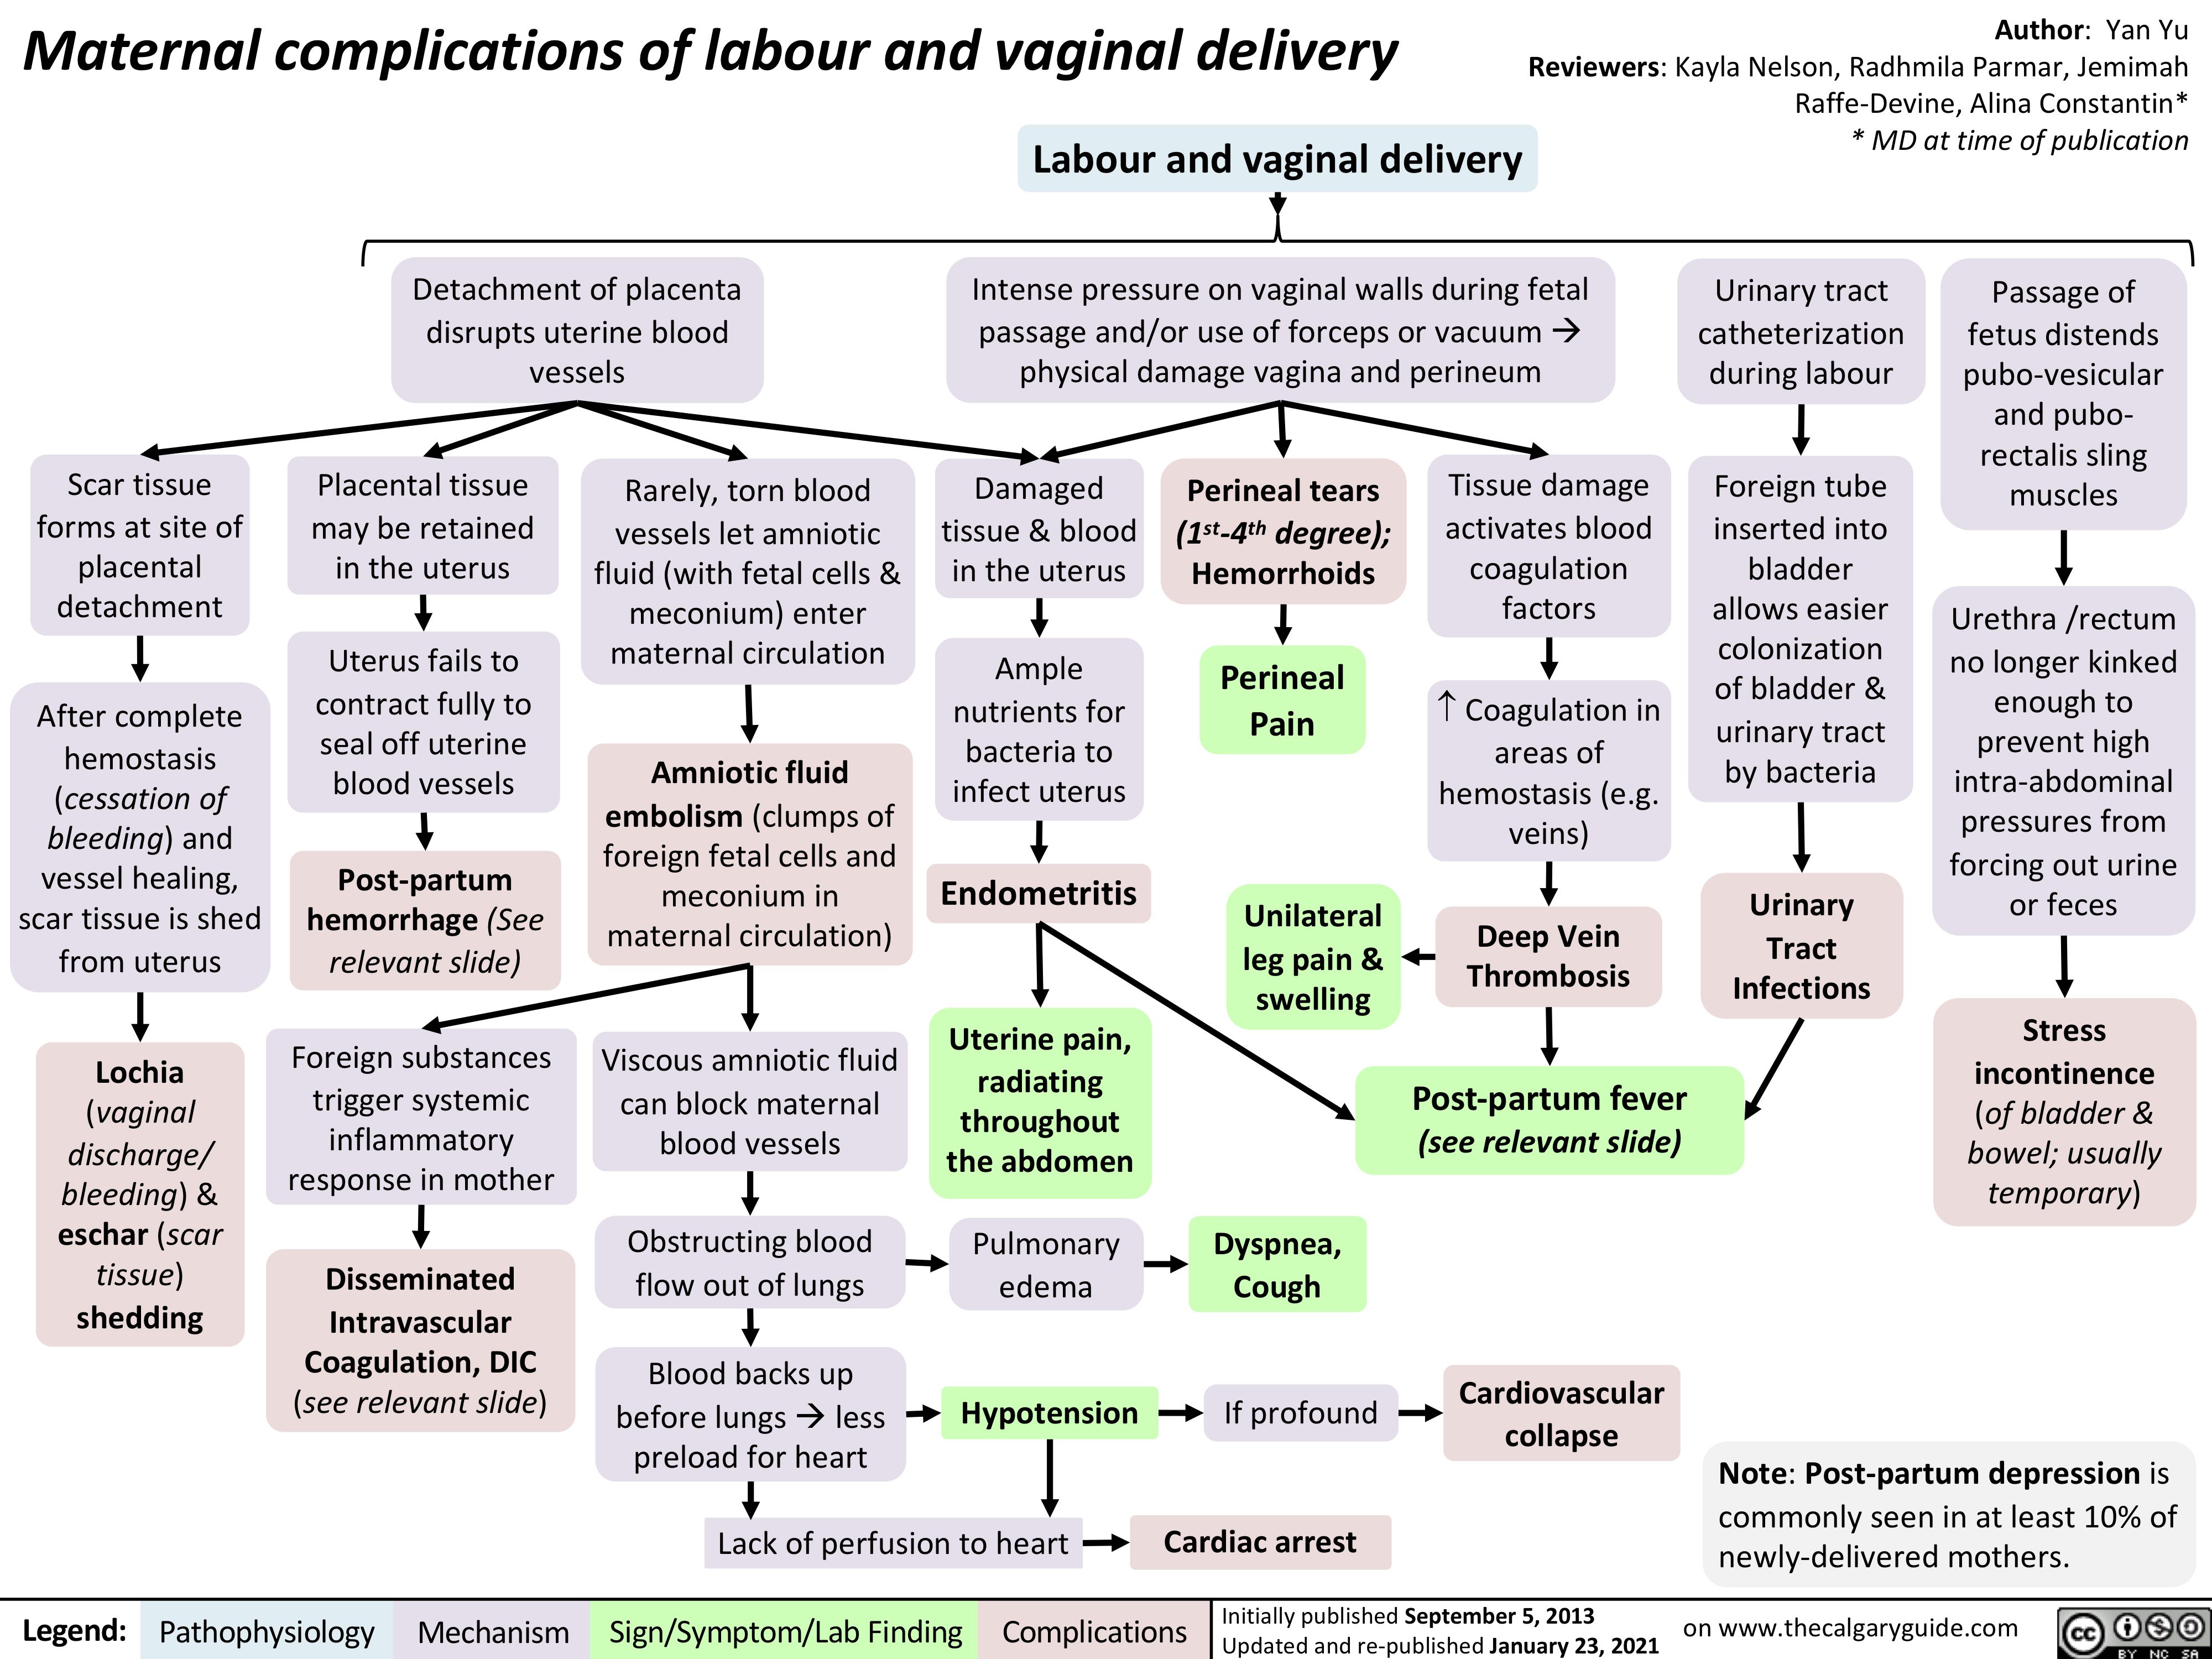 Maternal complications of labour and vaginal delivery
Author: Yan Yu Reviewers: Kayla Nelson, Radhmila Parmar, Jemimah Raffe-Devine, Alina Constantin* * MD at time of publication
 Labour and vaginal delivery
      Detachment of placenta disrupts uterine blood vessels
Intense pressure on vaginal walls during fetal passage and/or use of forceps or vacuumà physical damage vagina and perineum
Urinary tract catheterization during labour
Foreign tube inserted into bladder allows easier colonization of bladder & urinary tract by bacteria
Urinary Tract Infections
Passage of fetus distends pubo-vesicular and pubo- rectalis sling muscles
Urethra /rectum no longer kinked
enough to prevent high intra-abdominal pressures from forcing out urine or feces
Stress incontinence
(of bladder & bowel; usually temporary)
               Scar tissue forms at site of placental detachment
After complete hemostasis (cessation of bleeding) and vessel healing, scar tissue is shed from uterus
Lochia
(vaginal discharge/ bleeding) & eschar (scar tissue) shedding
Placental tissue may be retained in the uterus
Uterus fails to contract fully to seal off uterine blood vessels
Post-partum hemorrhage (See relevant slide)
Foreign substances trigger systemic inflammatory response in mother
Disseminated Intravascular Coagulation, DIC (see relevant slide)
Rarely, torn blood vessels let amniotic
fluid (with fetal cells & meconium) enter maternal circulation
Amniotic fluid embolism (clumps of foreign fetal cells and meconium in maternal circulation)
Viscous amniotic fluid can block maternal blood vessels
Obstructing blood flow out of lungs
Blood backs up before lungsàless preload for heart
Damaged tissue & blood in the uterus
Ample nutrients for bacteria to infect uterus
Endometritis
Uterine pain, radiating throughout the abdomen
Pulmonary edema
Hypotension
Perineal tears
(1st-4th degree);
Hemorrhoids
Perineal Pain
Unilateral leg pain & swelling
Dyspnea, Cough
If profound
Cardiac arrest
Tissue damage activates blood coagulation factors
­ Coagulation in areas of hemostasis (e.g. veins)
Deep Vein Thrombosis
Post-partum fever
(see relevant slide)
Cardiovascular collapse
                                                         Lack of perfusion to heart
Note: Post-partum depression is commonly seen in at least 10% of newly-delivered mothers.
  Legend:
 Pathophysiology
Mechanism
Sign/Symptom/Lab Finding
  Complications
Initially published September 5, 2013 on www.thecalgaryguide.com Updated and re-published January 23, 2021
    